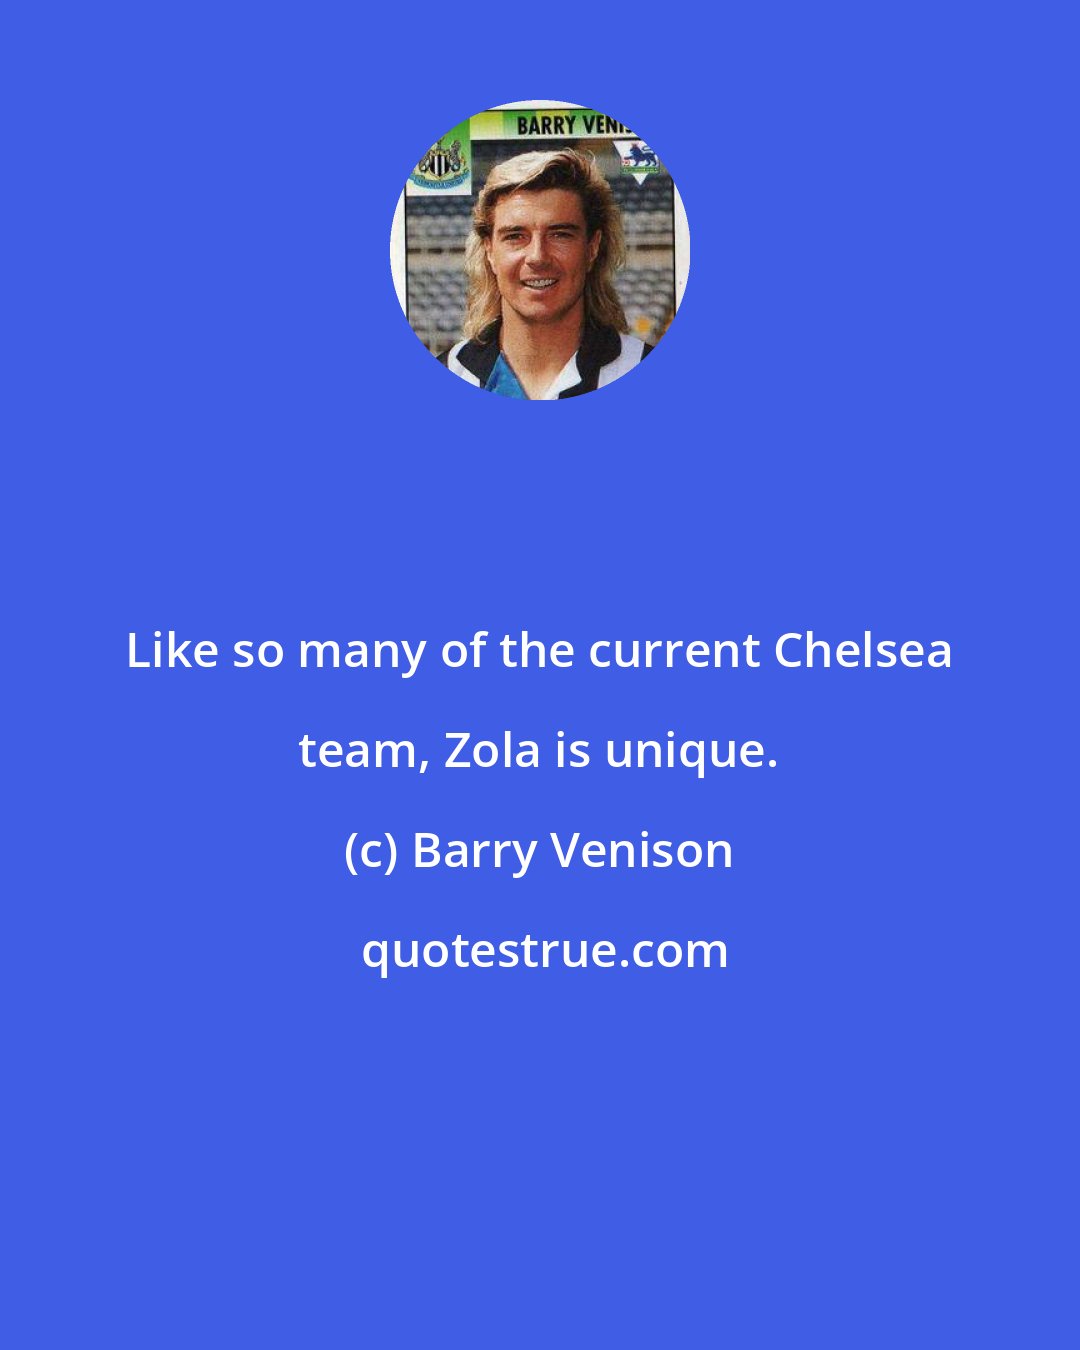 Barry Venison: Like so many of the current Chelsea team, Zola is unique.